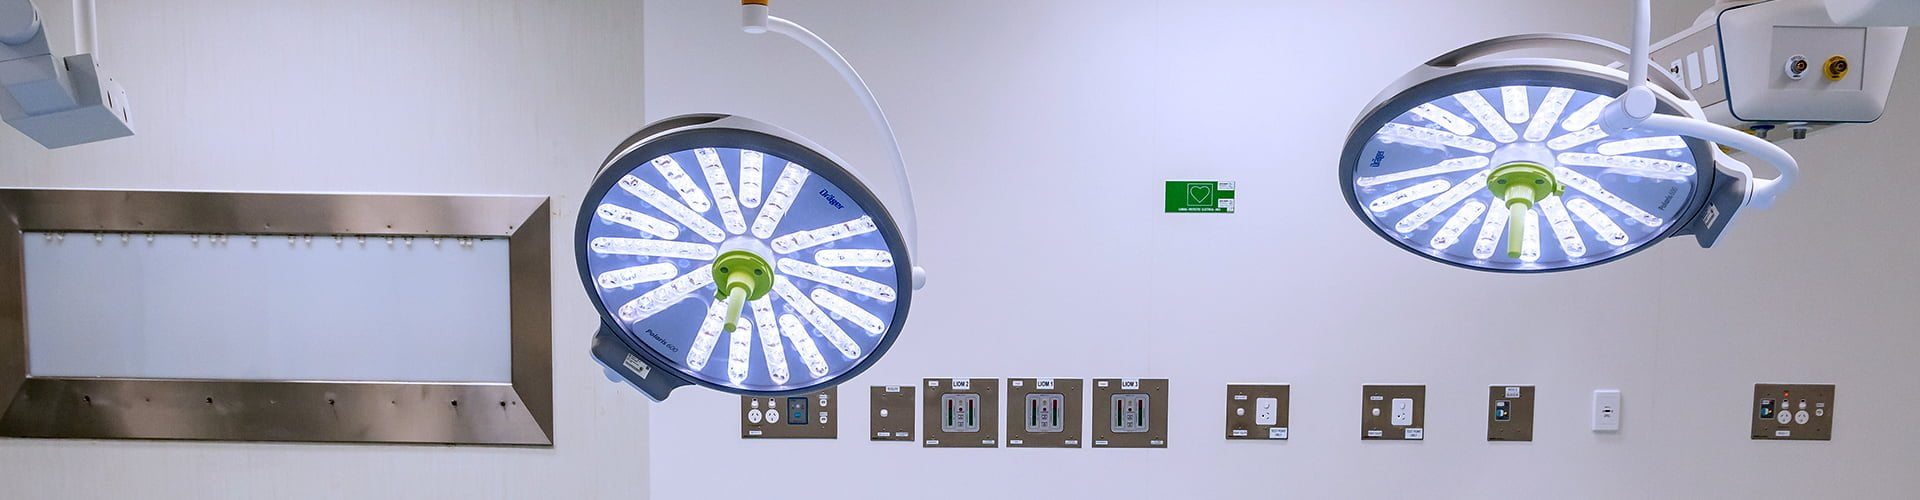 Image for FREMANTLE HOSPITAL OPERATING THEATRES MECHANICAL SERVICES UPGRADE